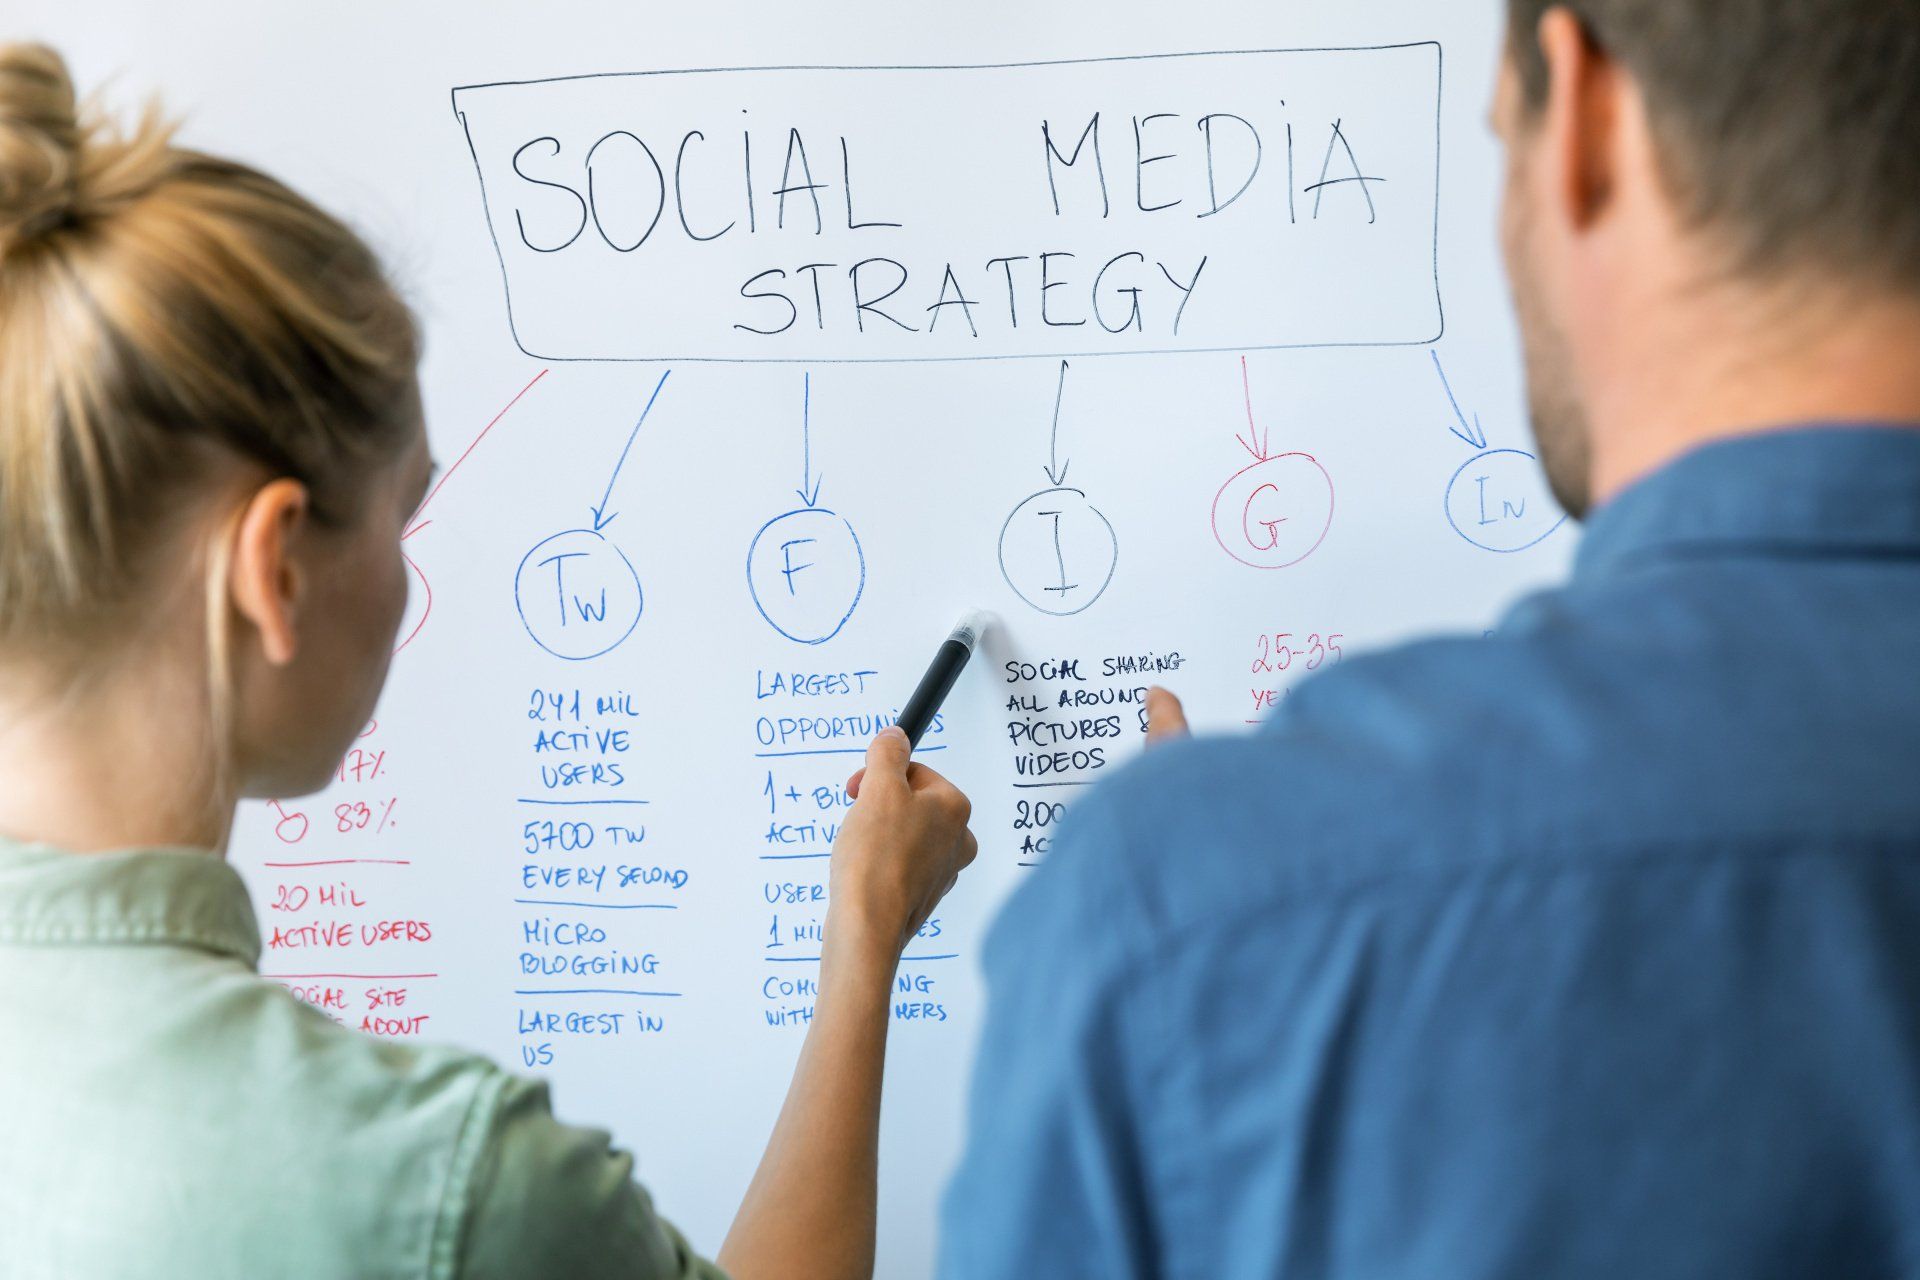 Man and woman planning 'Social Media Strategy' on a whiteboard